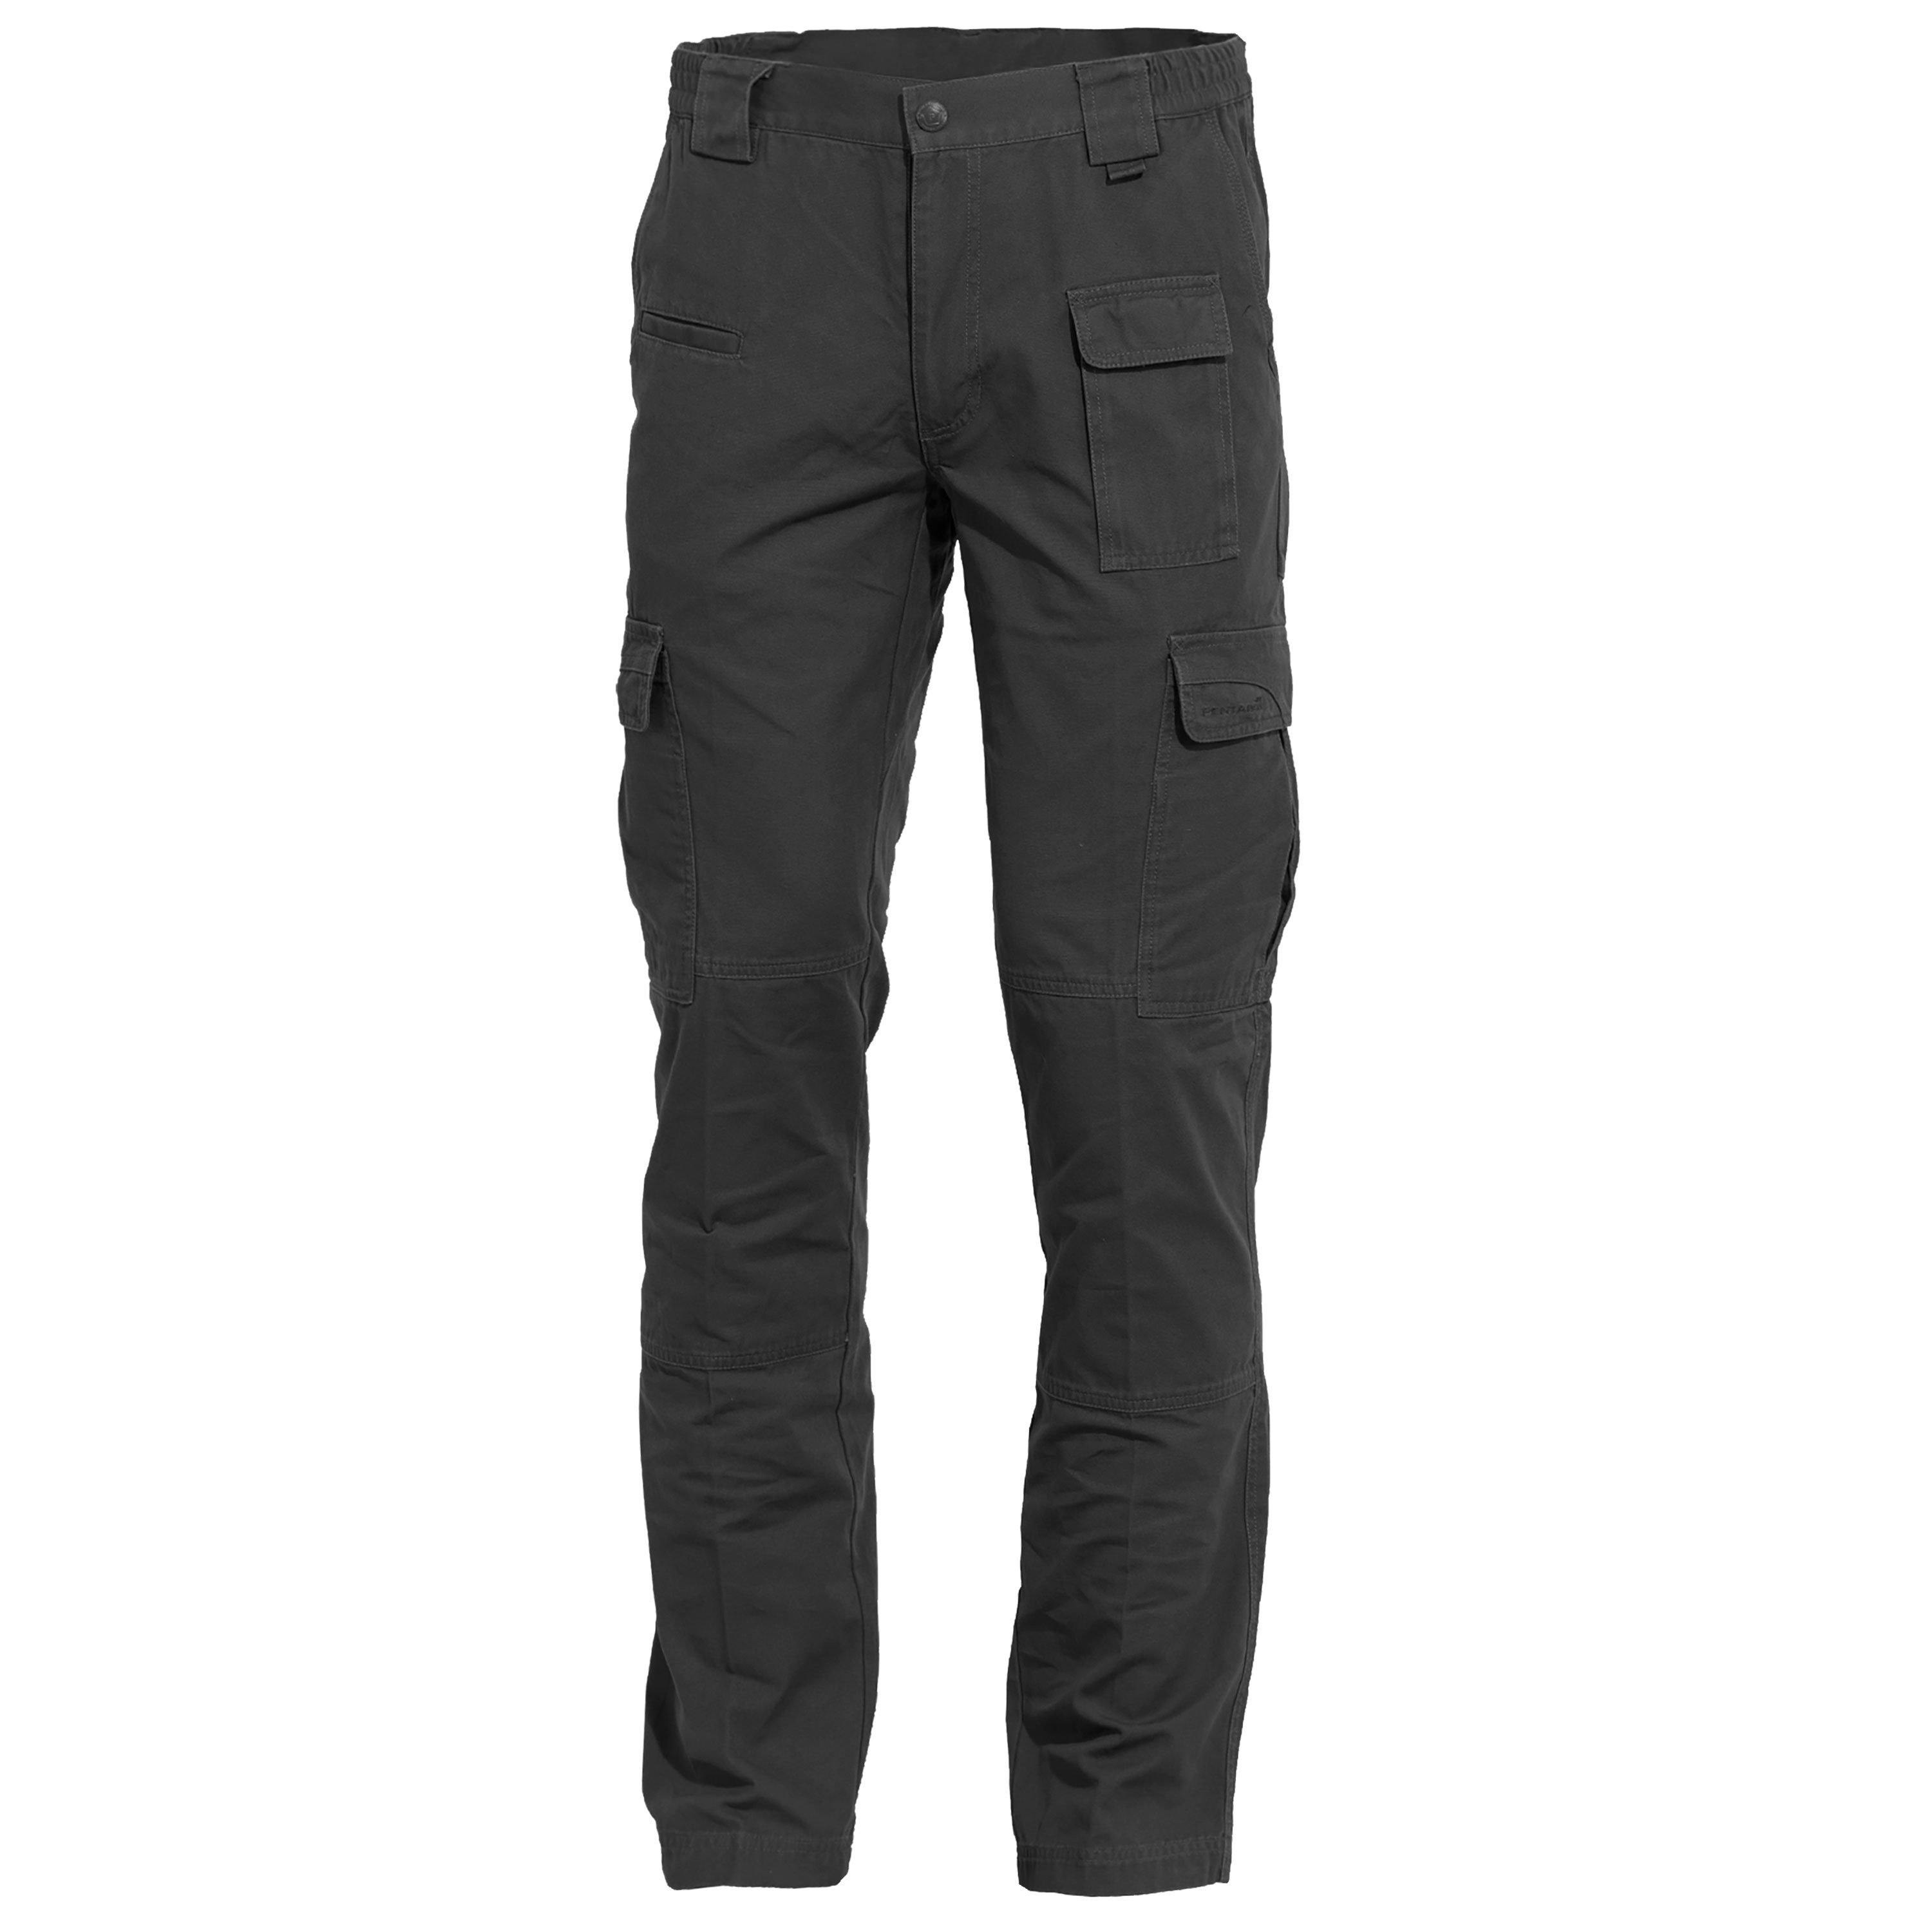 Purchase the Pentagon Pants Elgon 2.0 Tactical black by ASMC